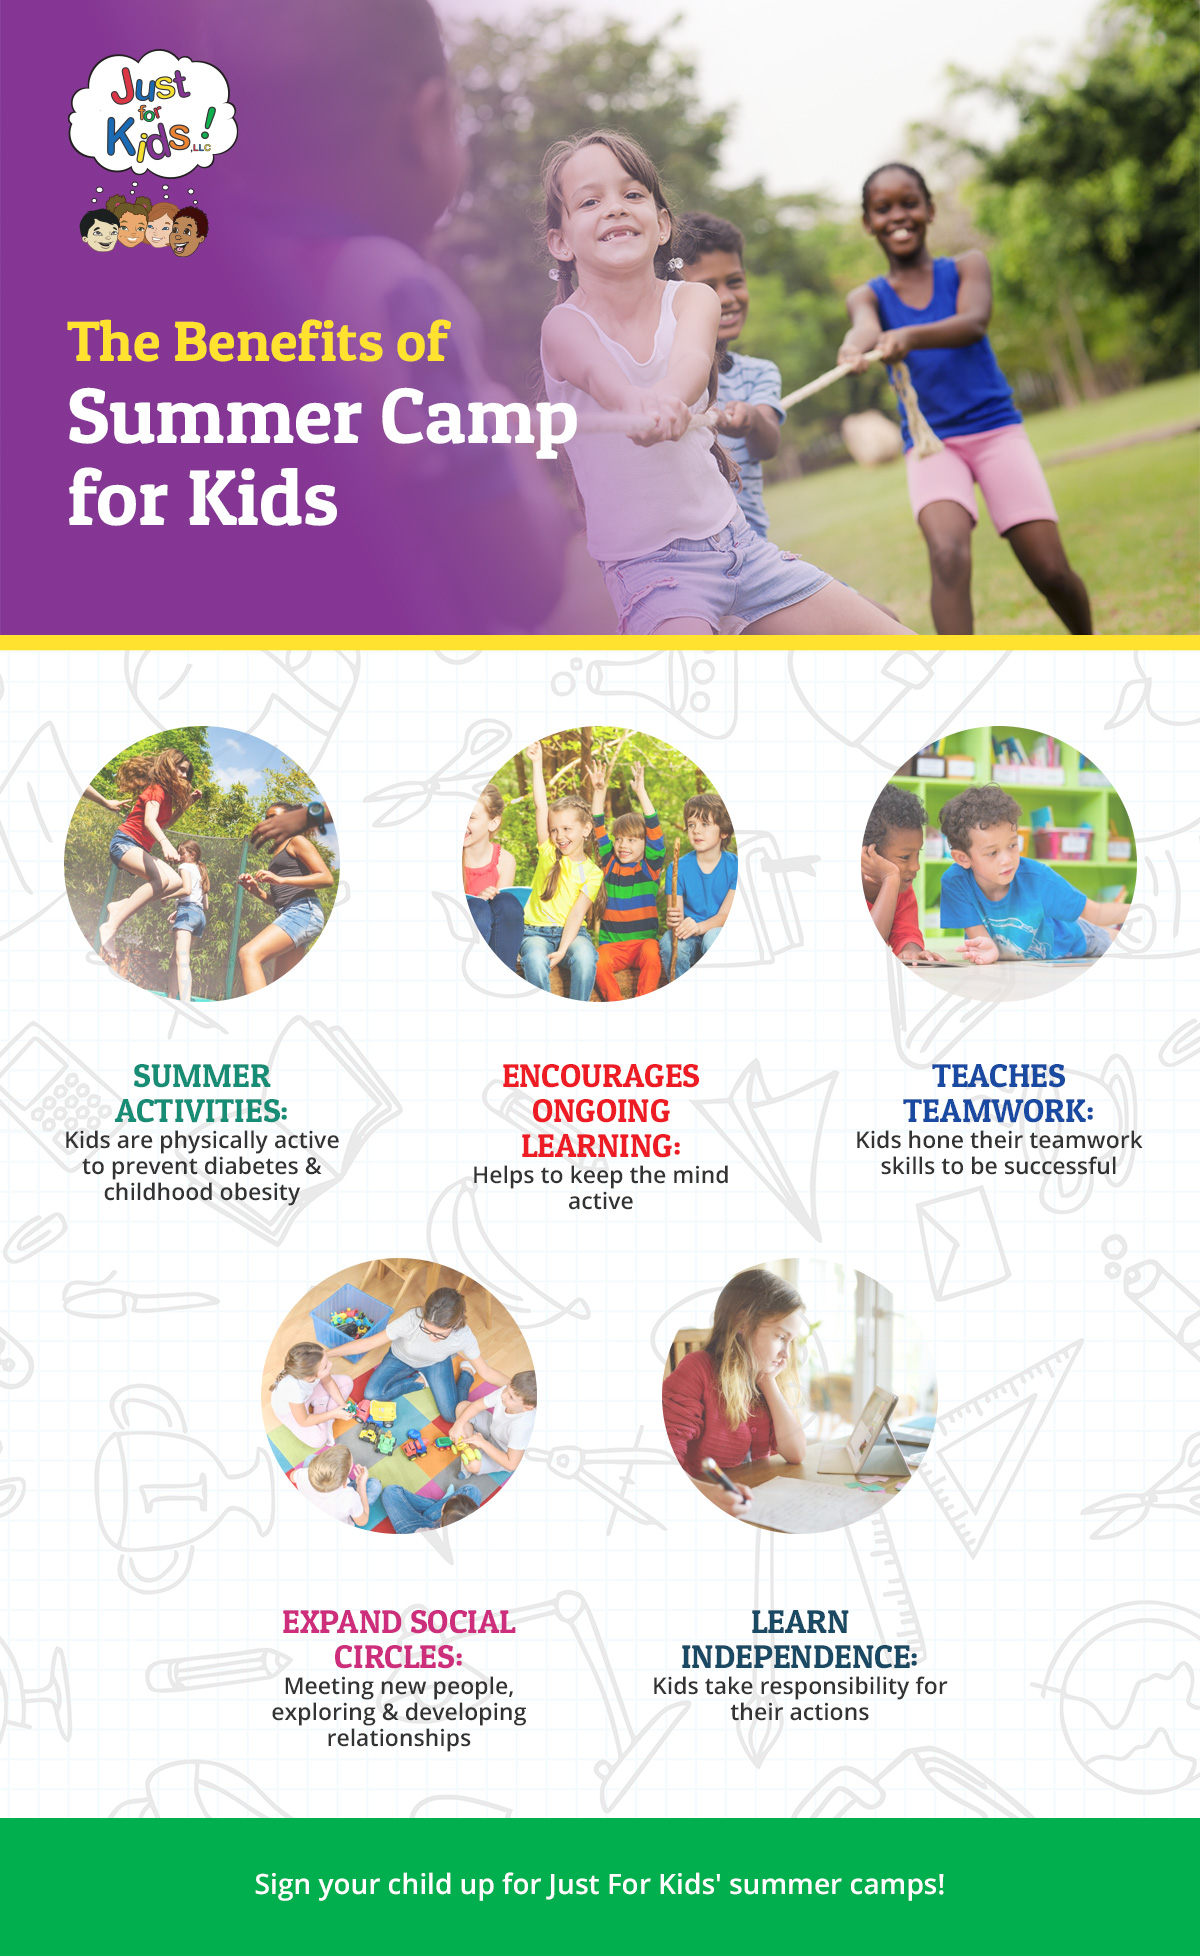 The-Benefits-of-Summer-Camp-for-Kids-610d7ea9041a9